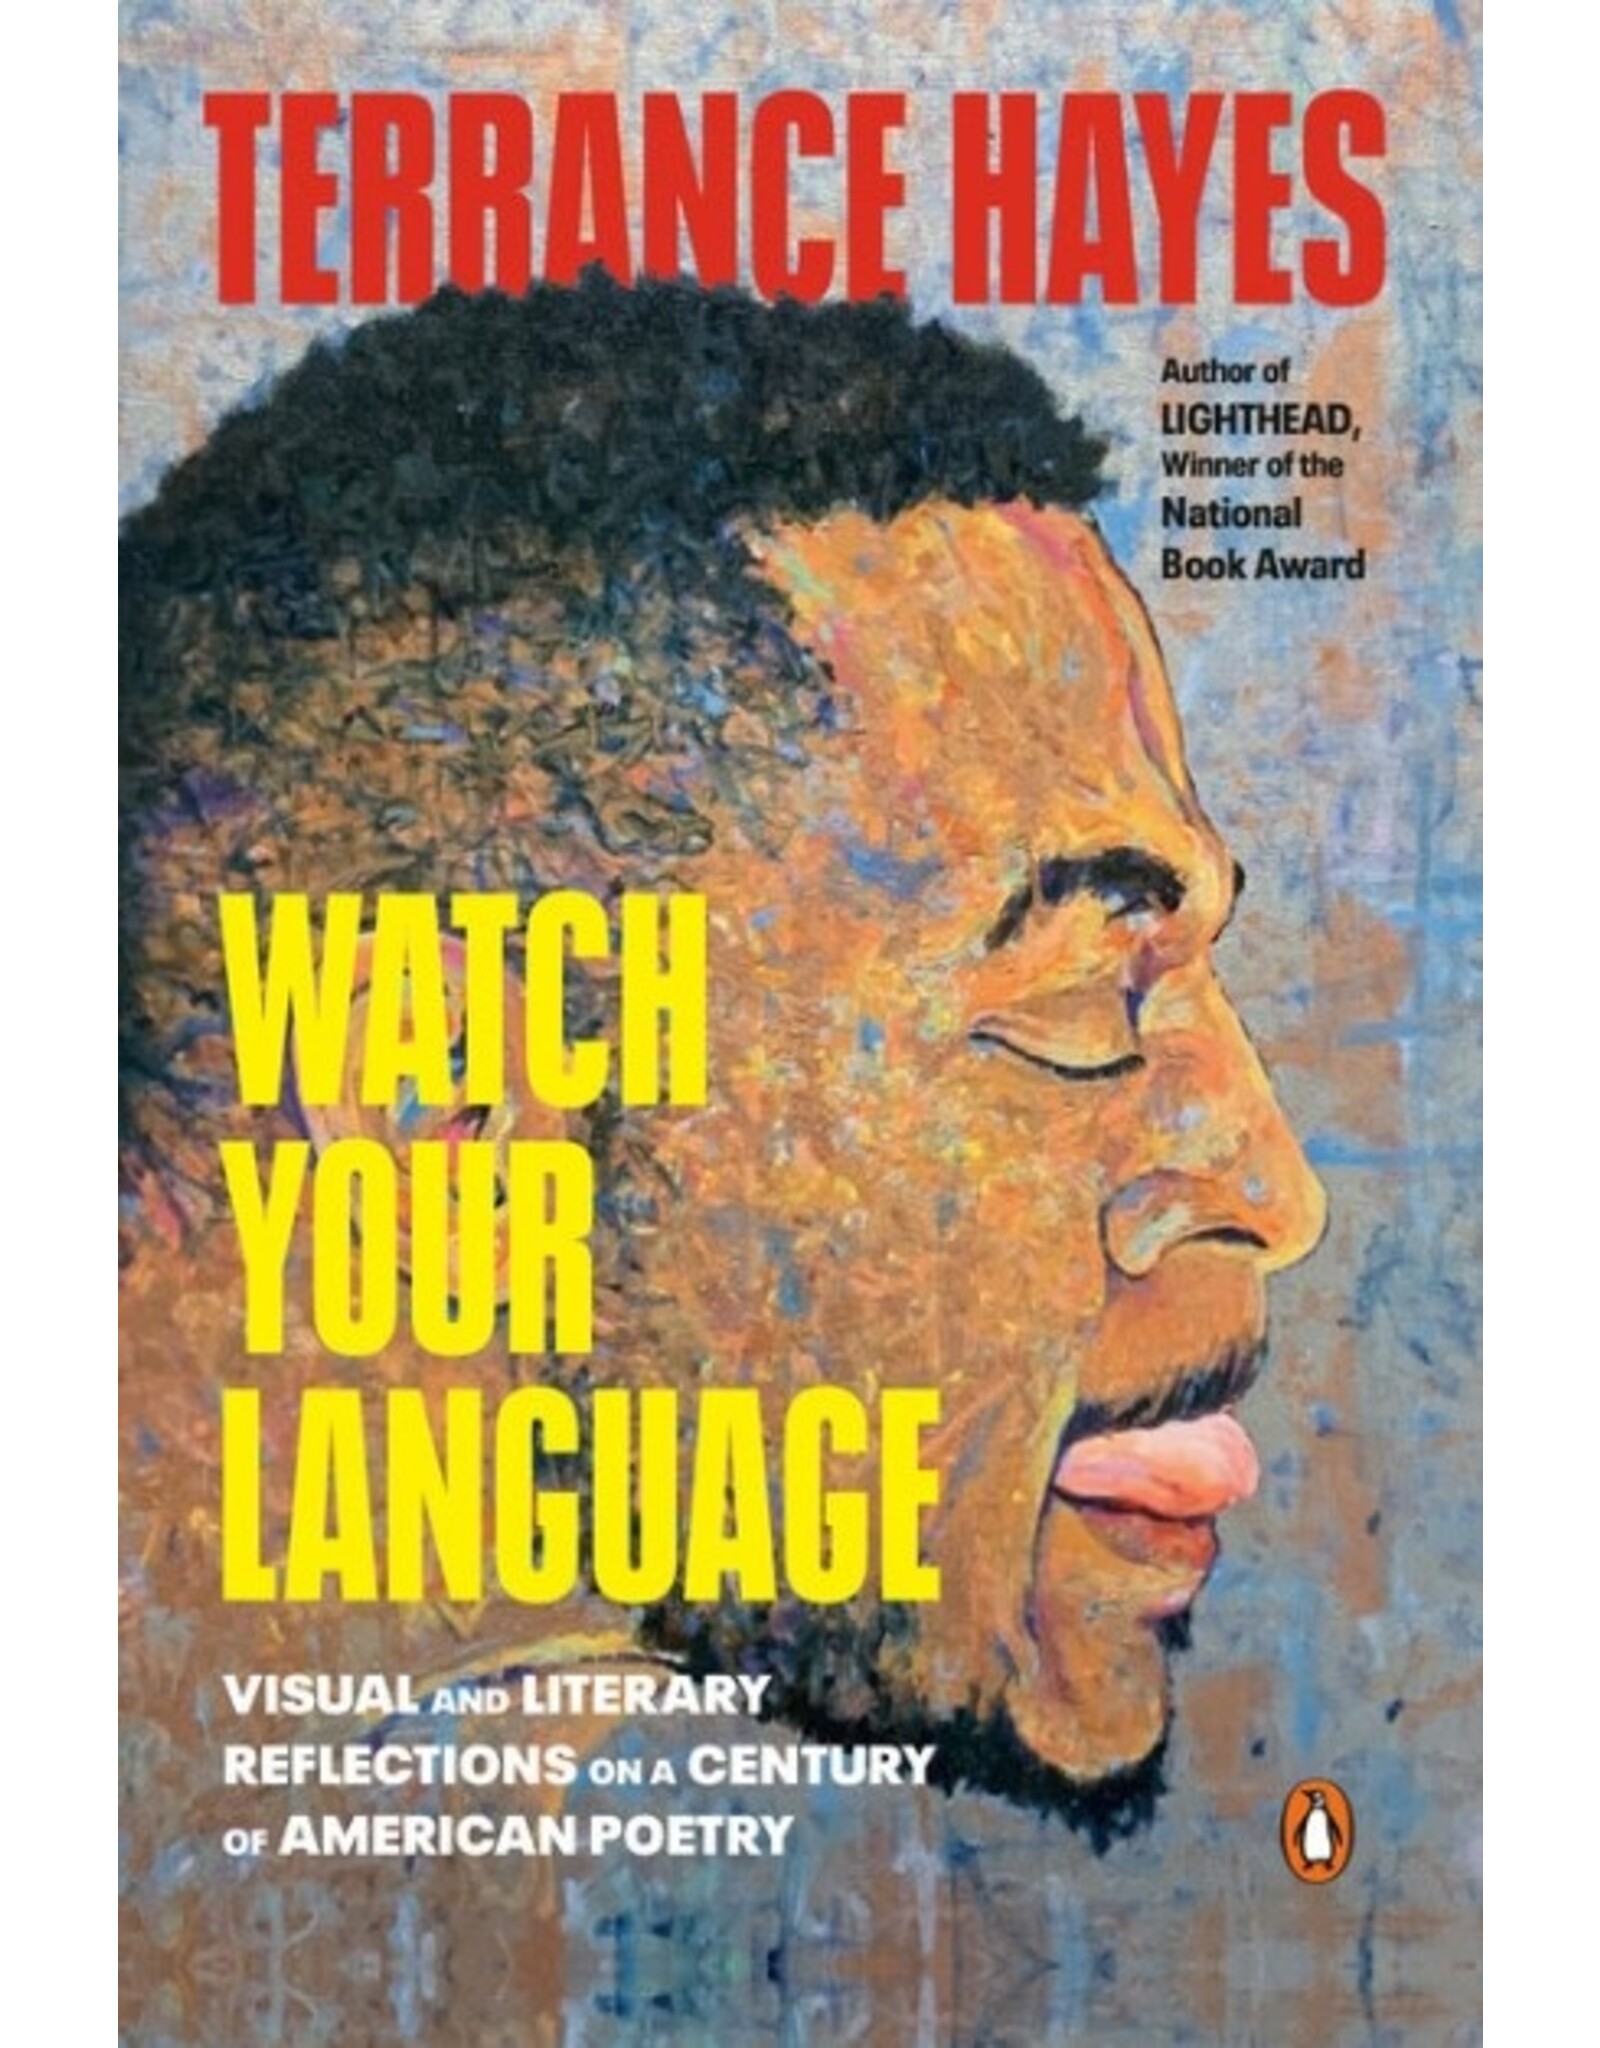 Terrance Hayes: Watch Your Language